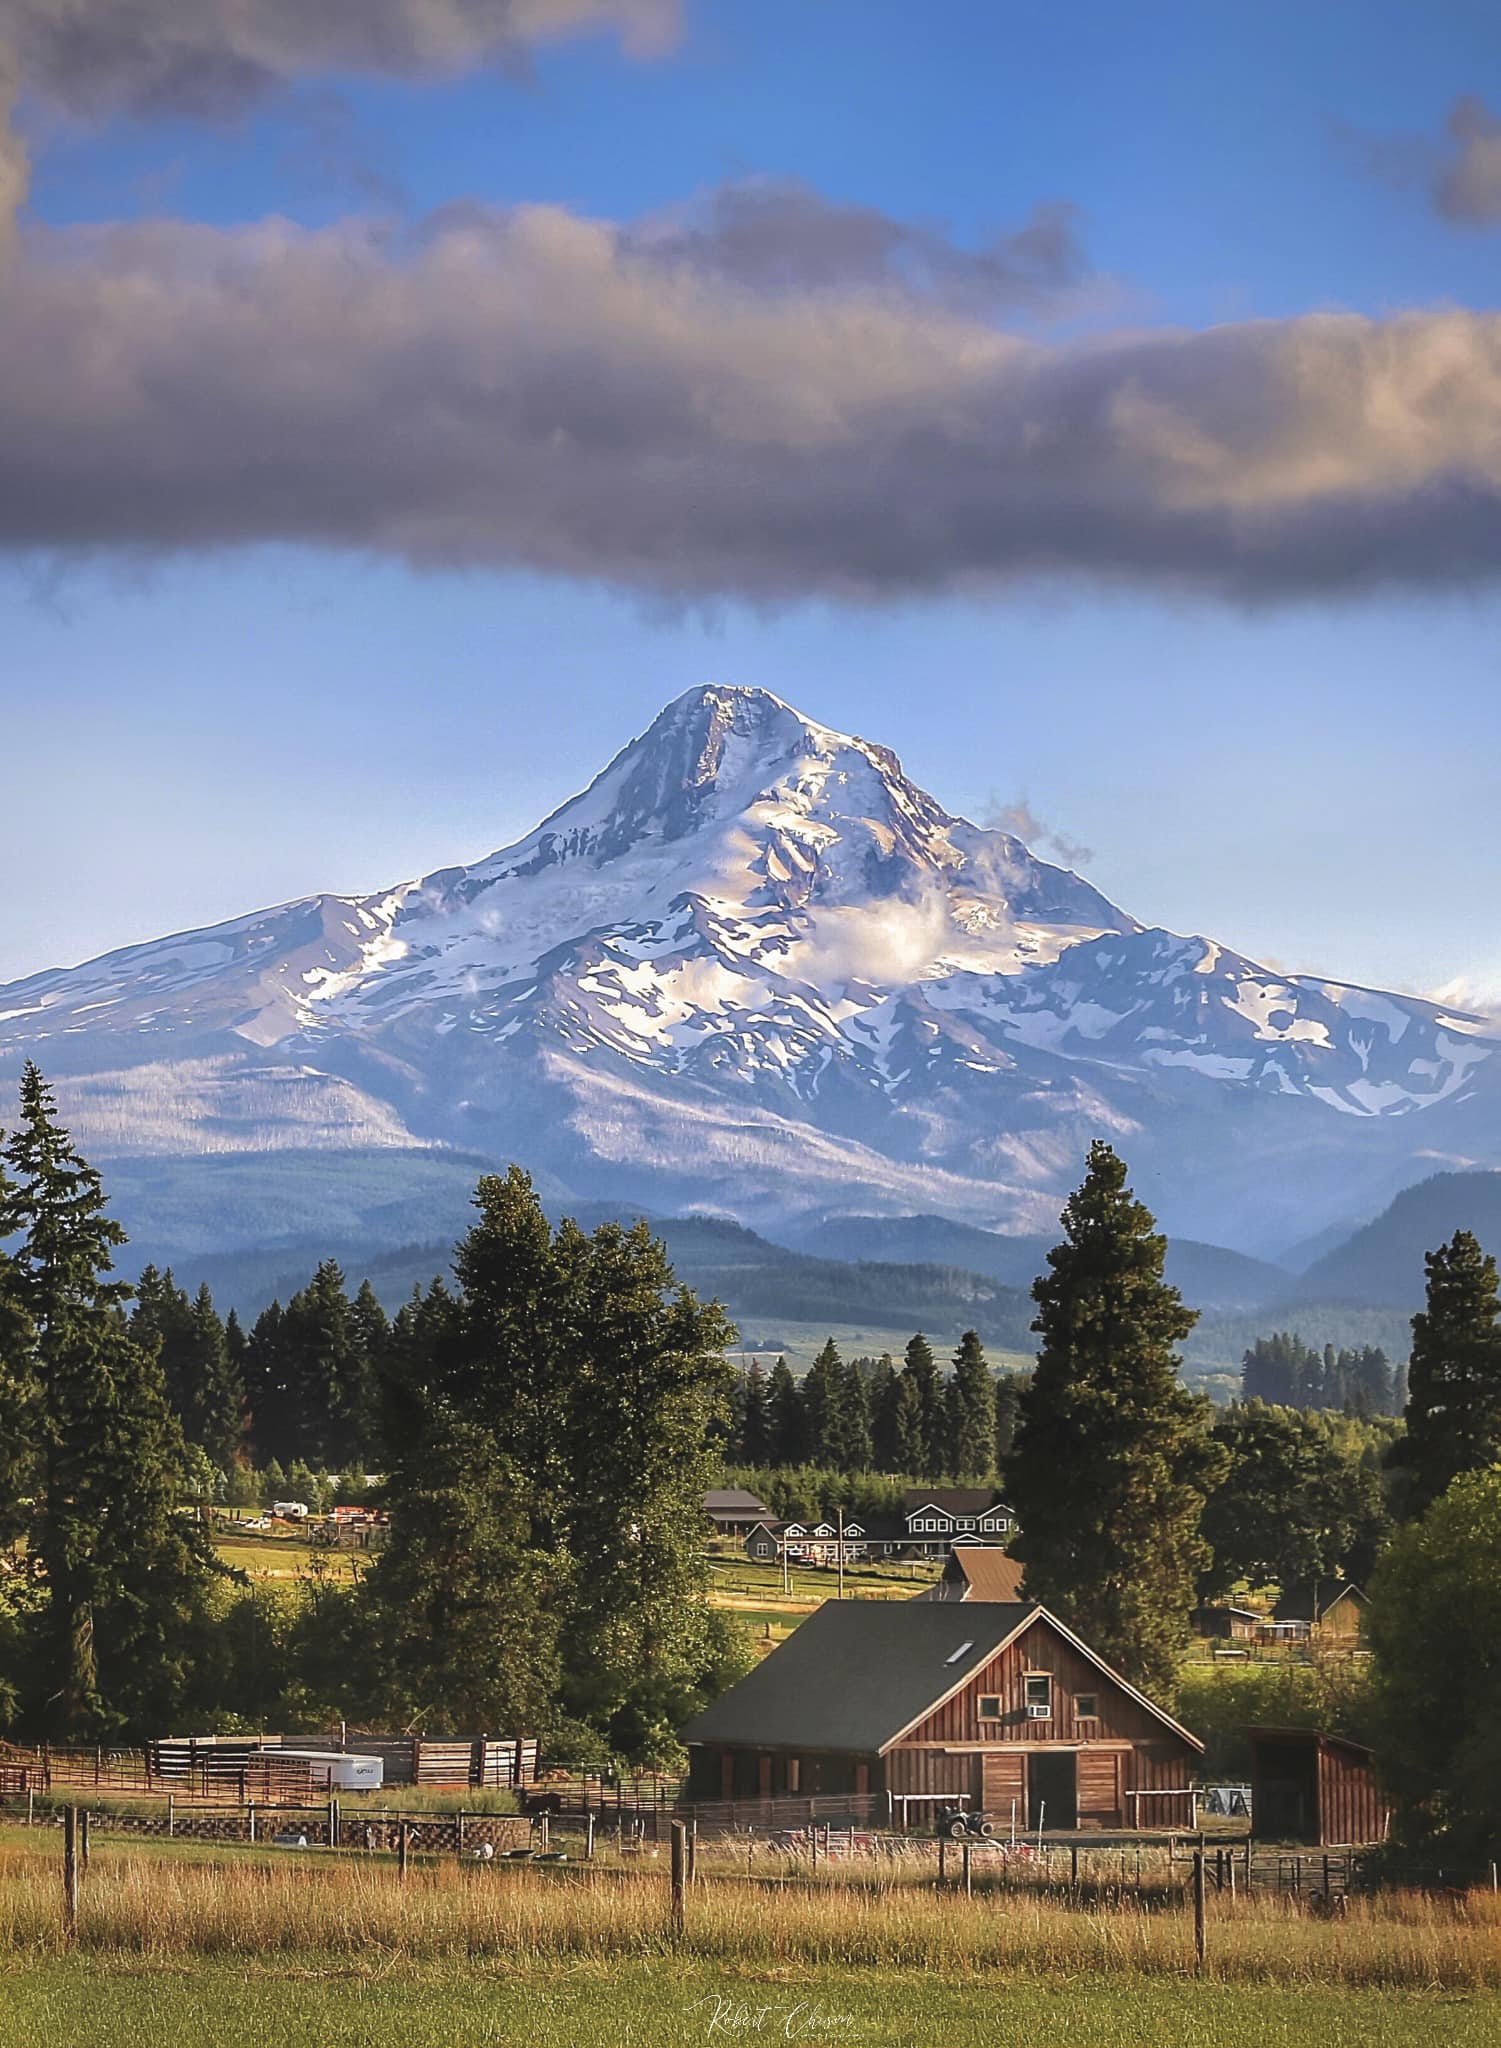 Mt. Hood from Parkdale, OR